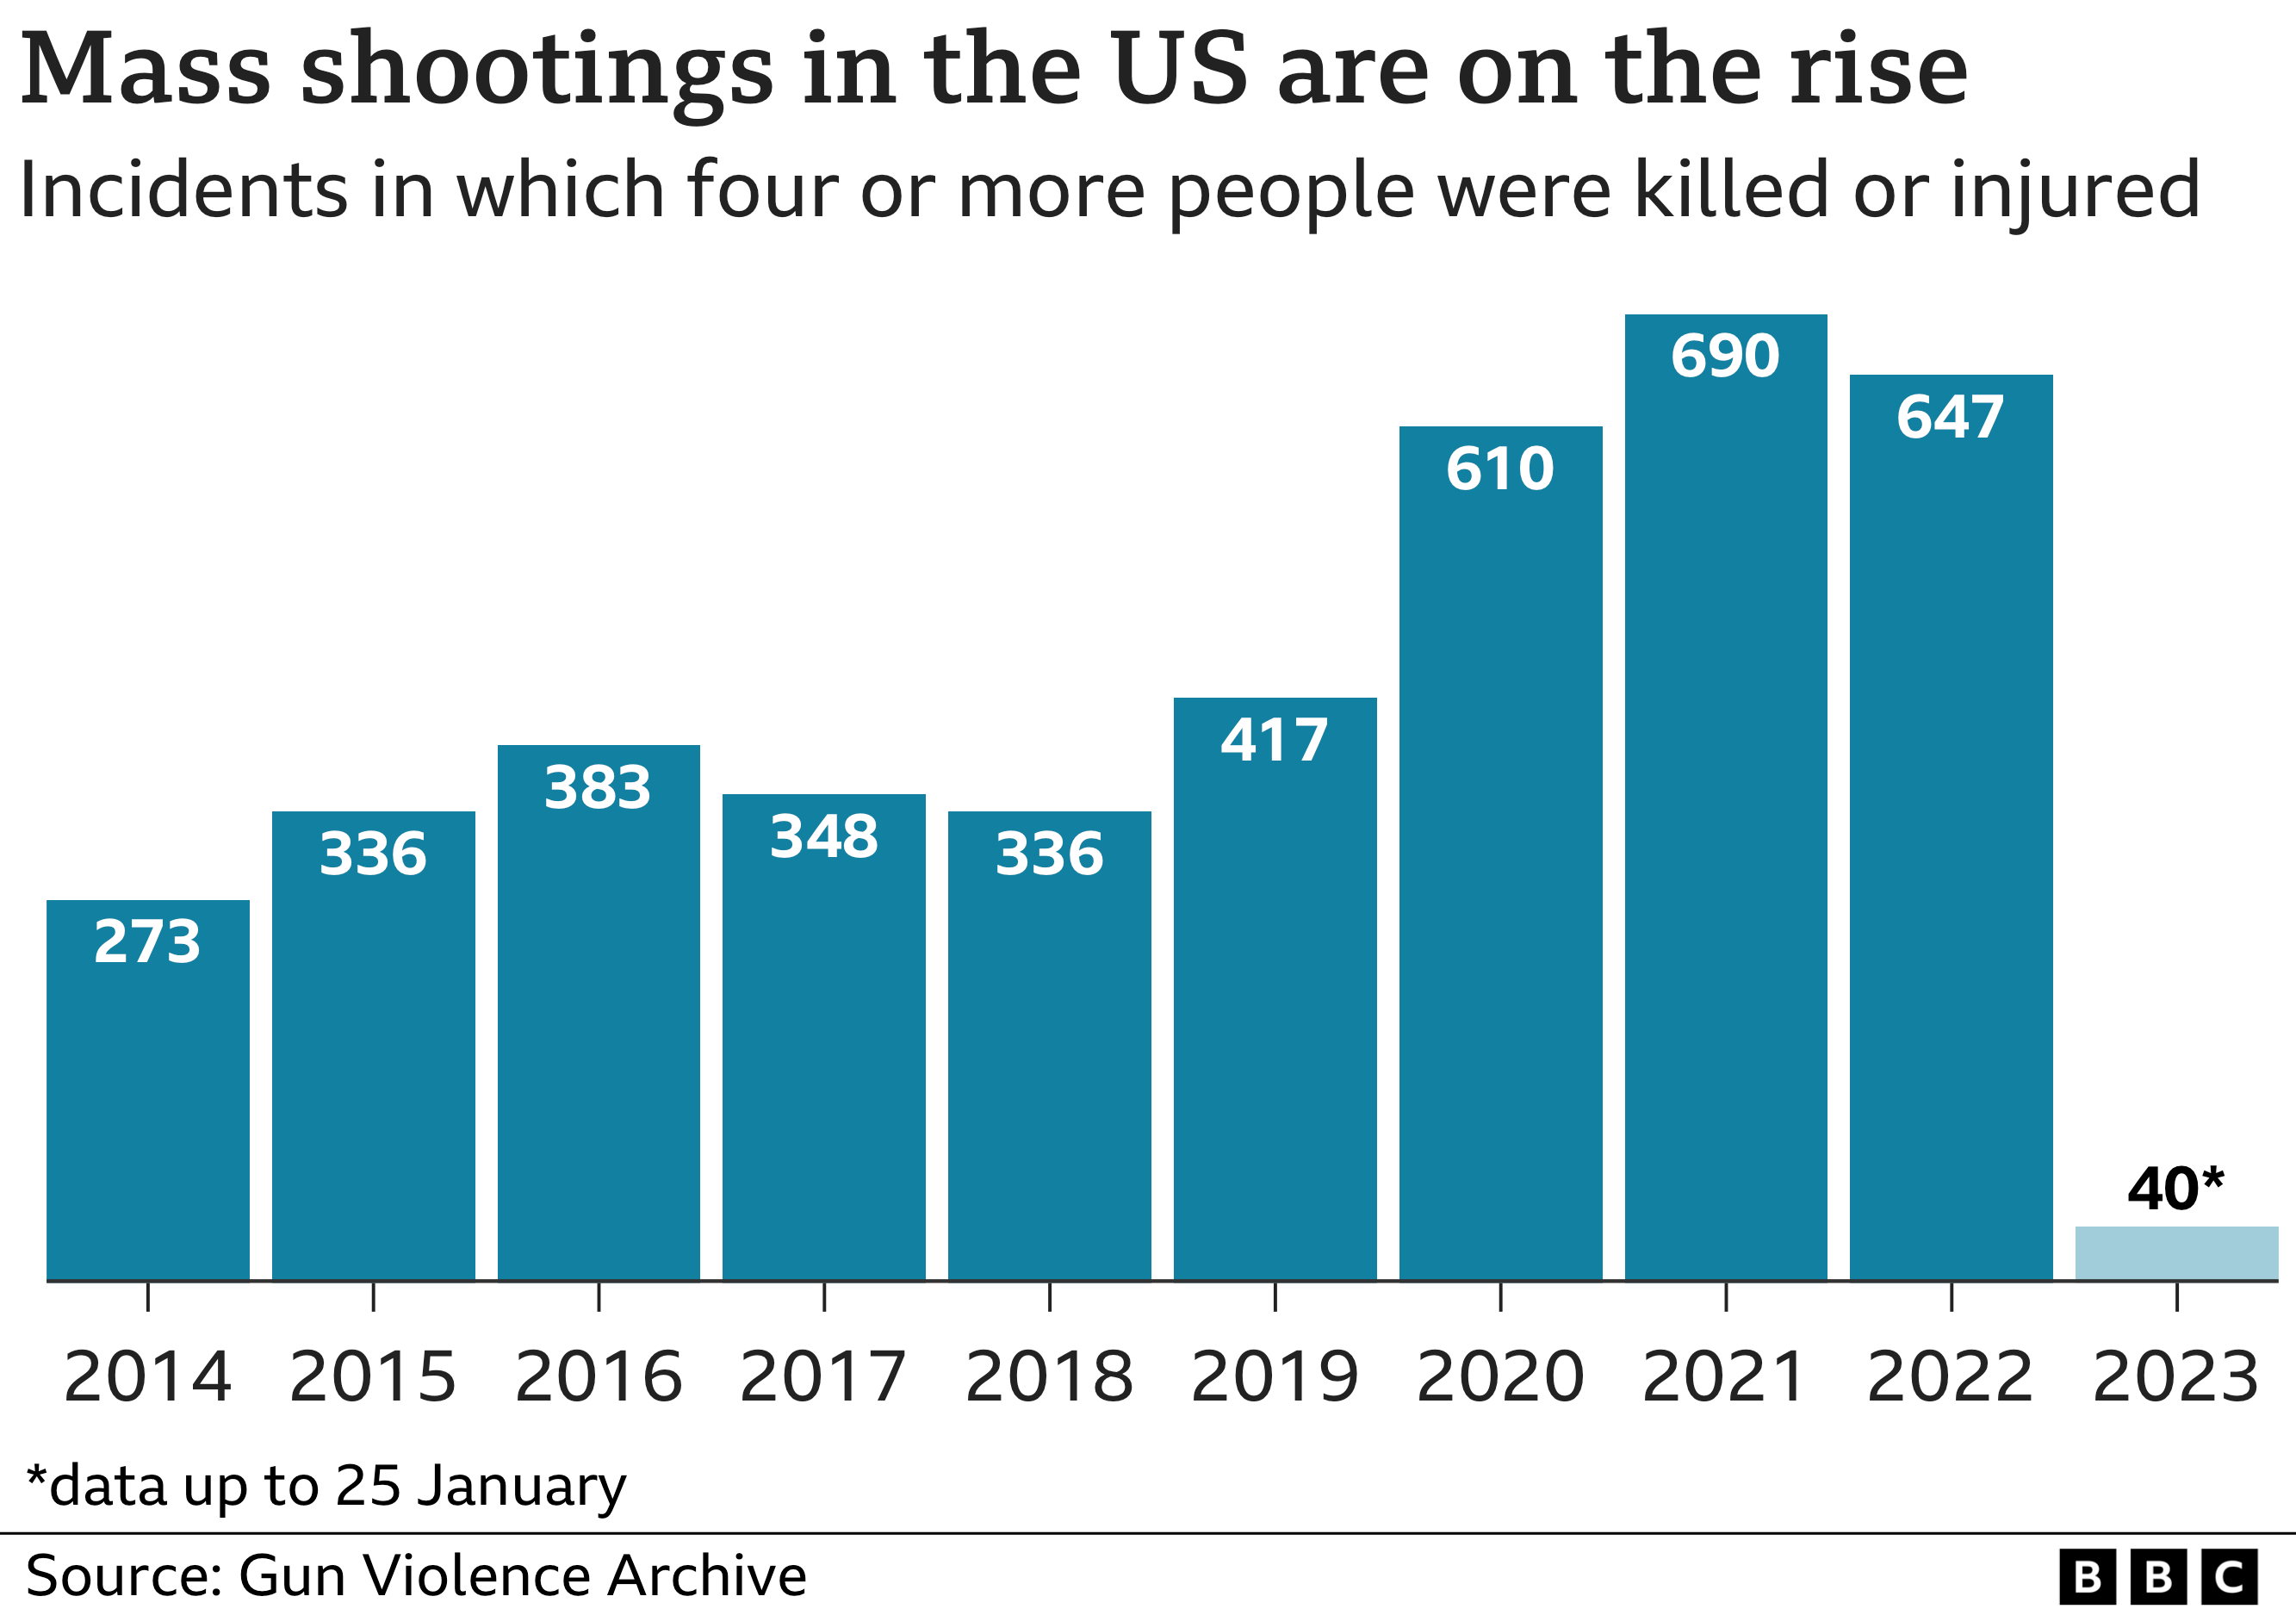 Bar chart showing the number of mass shooting incidents that have happened in the US since 2014, with the lowest figure being in 2014 at 273 incidents, then being between 330-420 for the next five years before jumping to above 600 in 2020 and every full year since. The data is from www.gunviolencearchive.org.